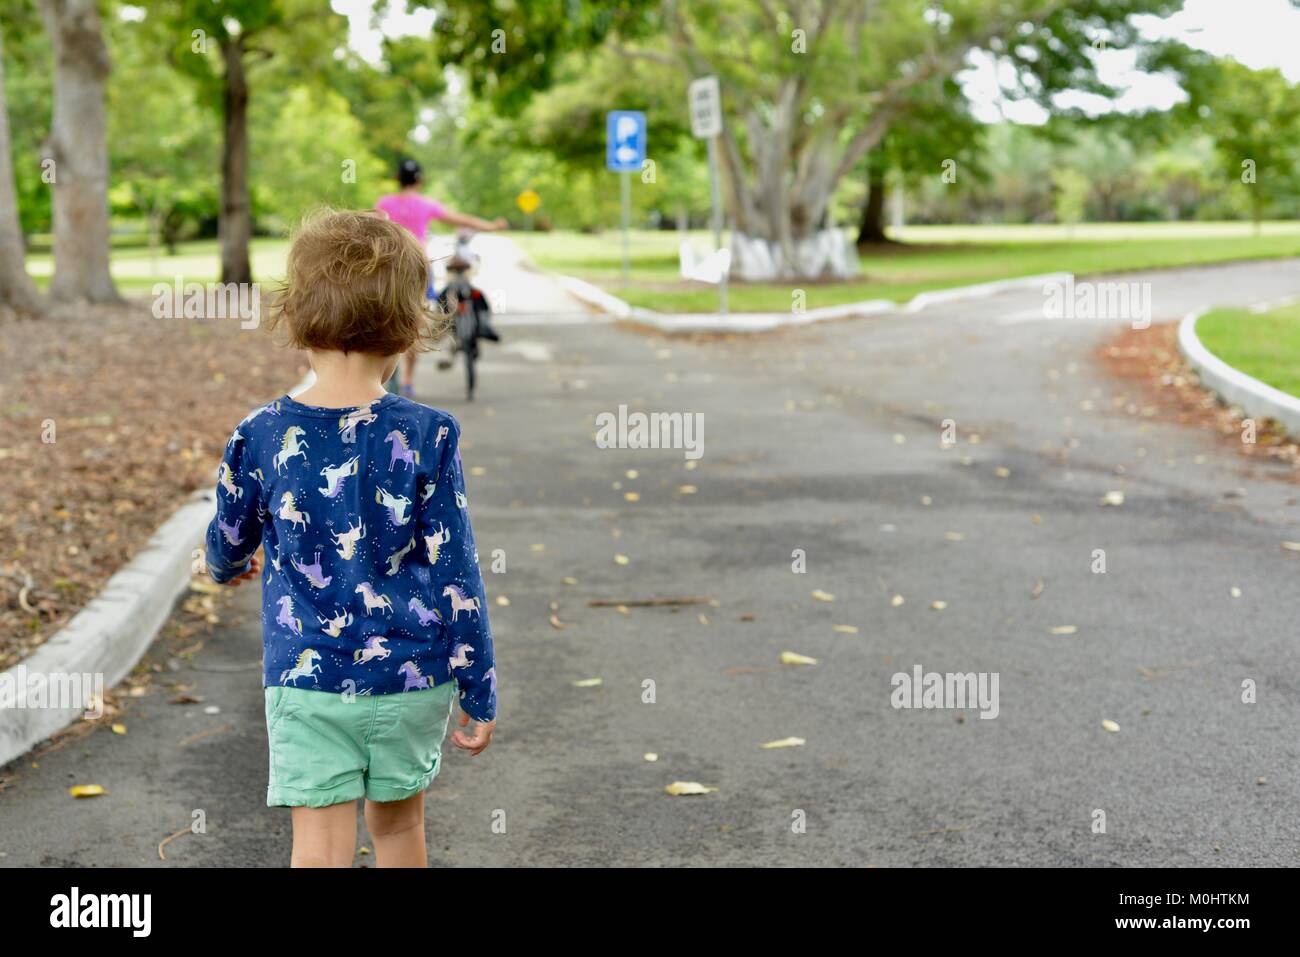 Young child walks on a road with women and bike in distance, Anderson Park Botanic Gardens, Townsville, Queensland, Australia Stock Photo